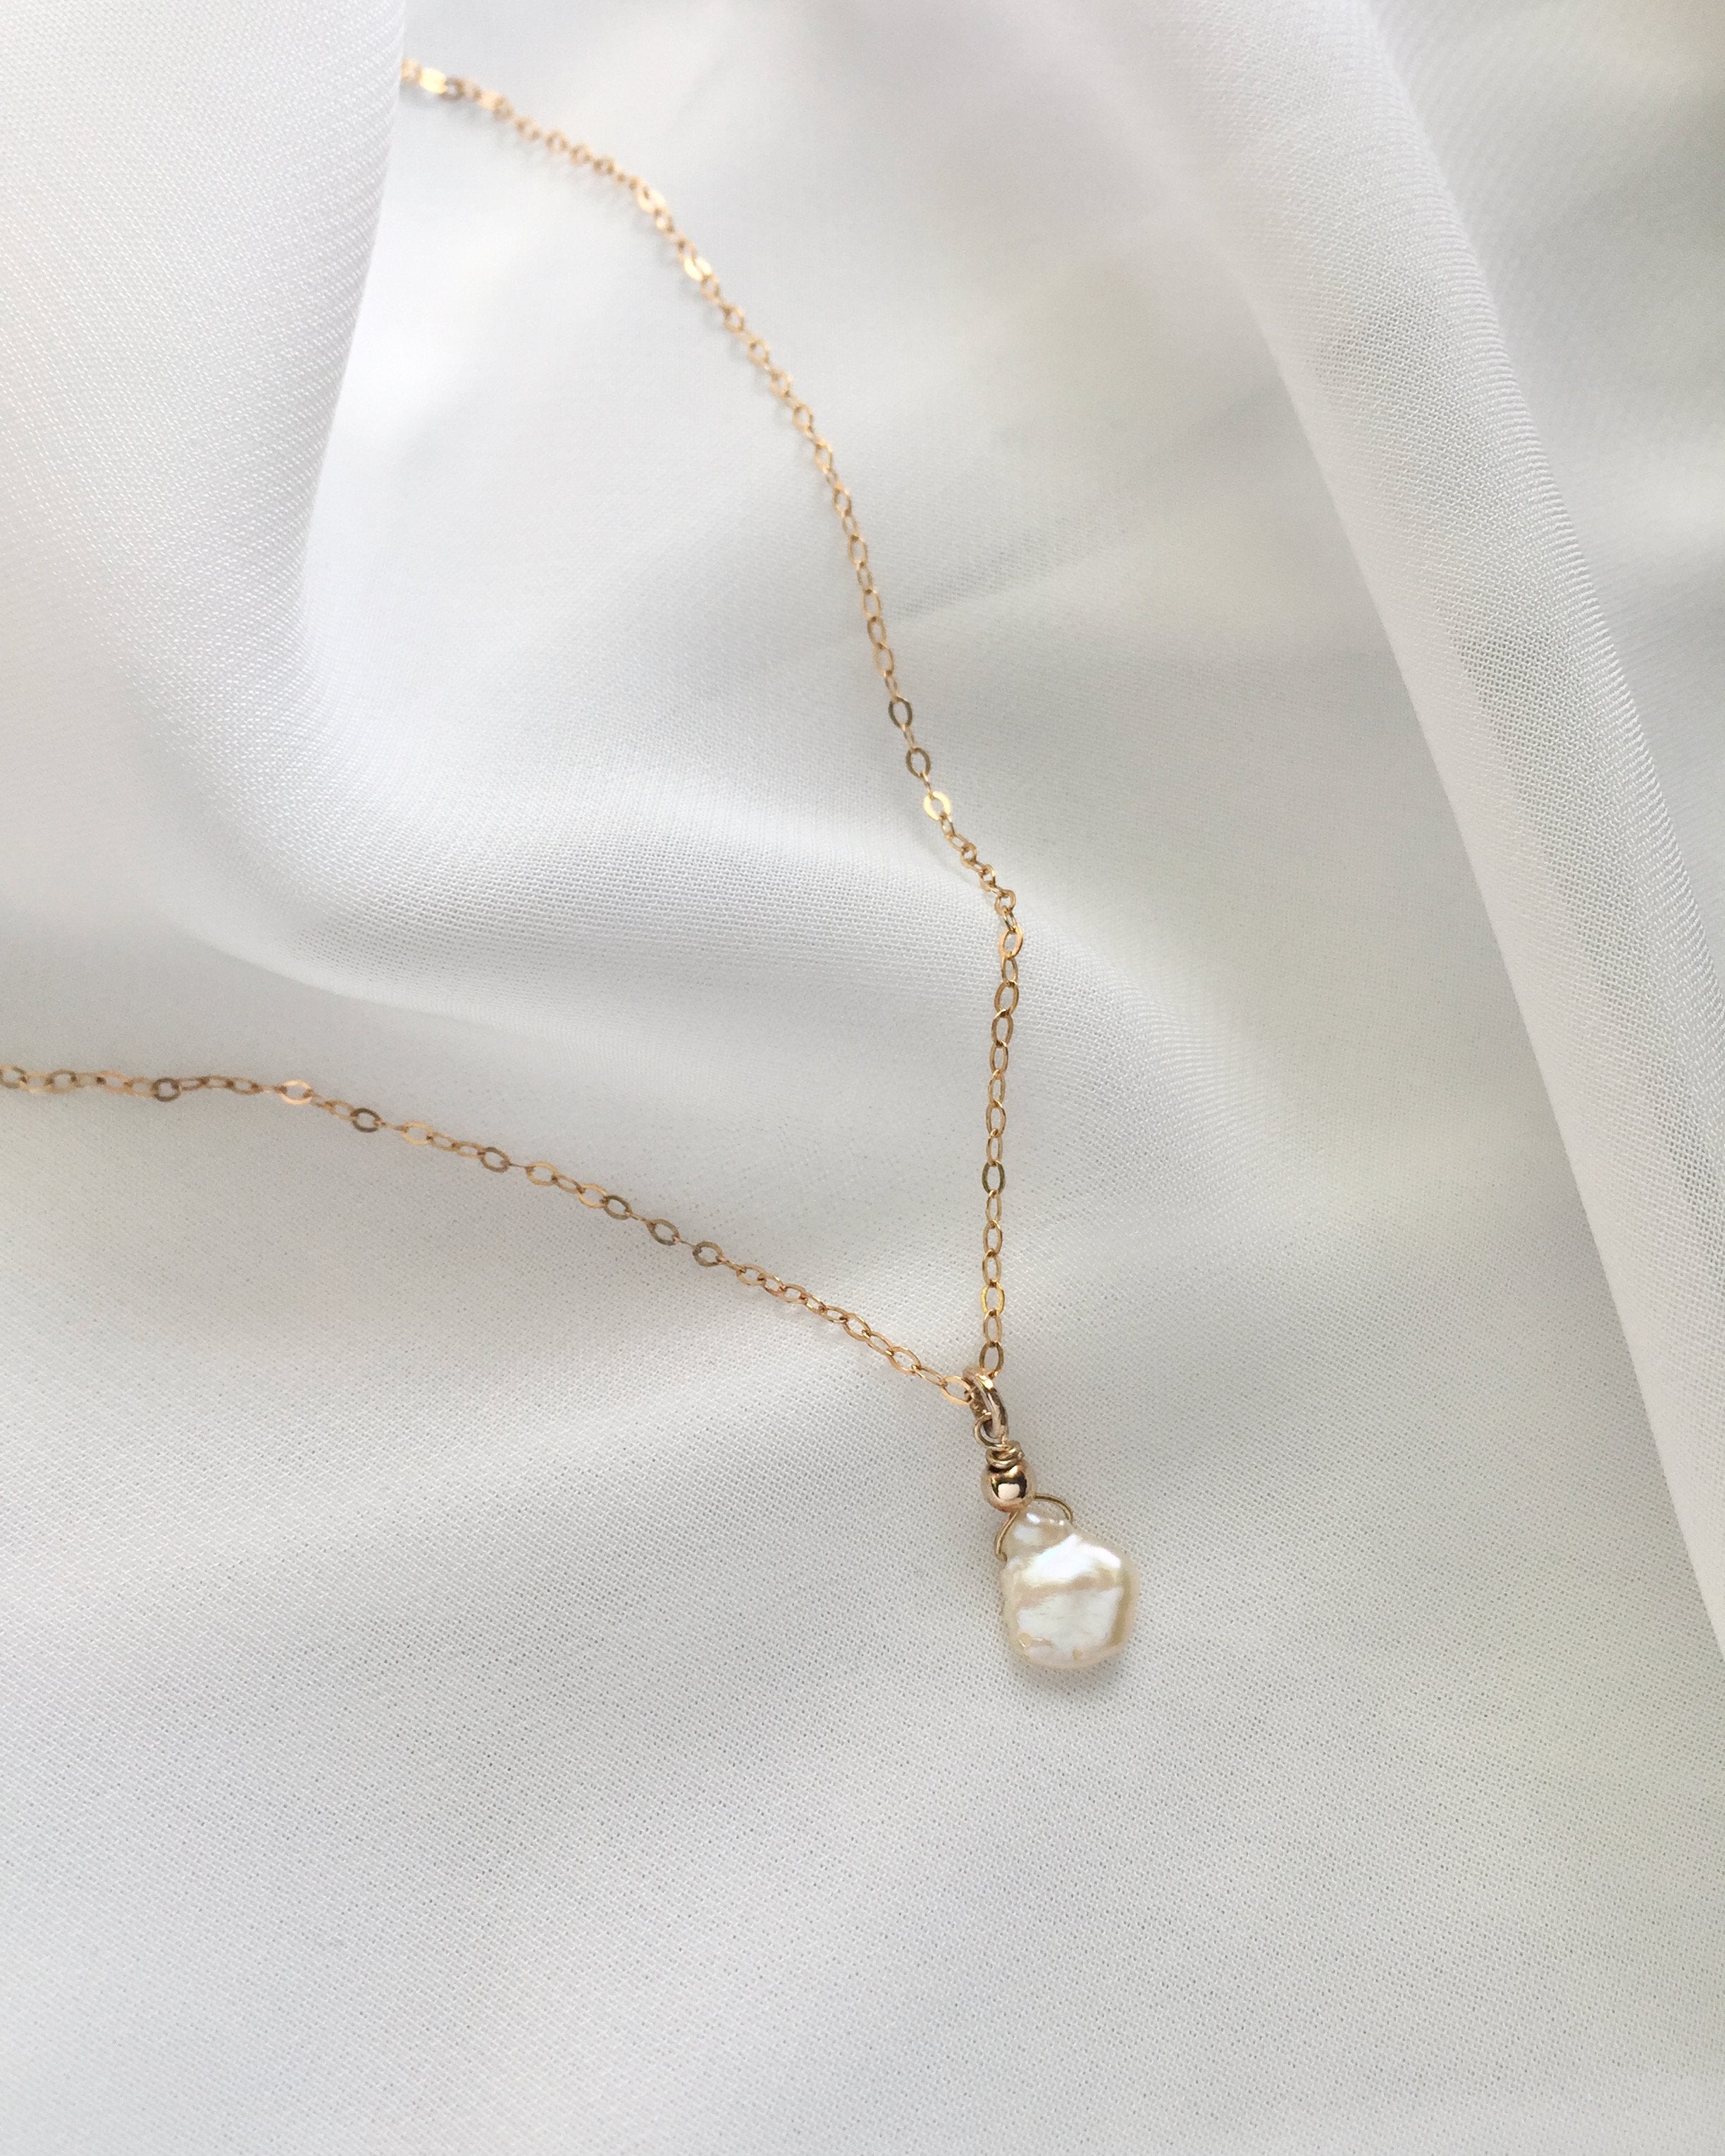 Thoughtful Birthday Necklace Gift | Meaningful Birthday Jewelry Gifts For Her | Delicate Pearl Necklace In Gold Filled or Sterling Silver | IB Jewelry